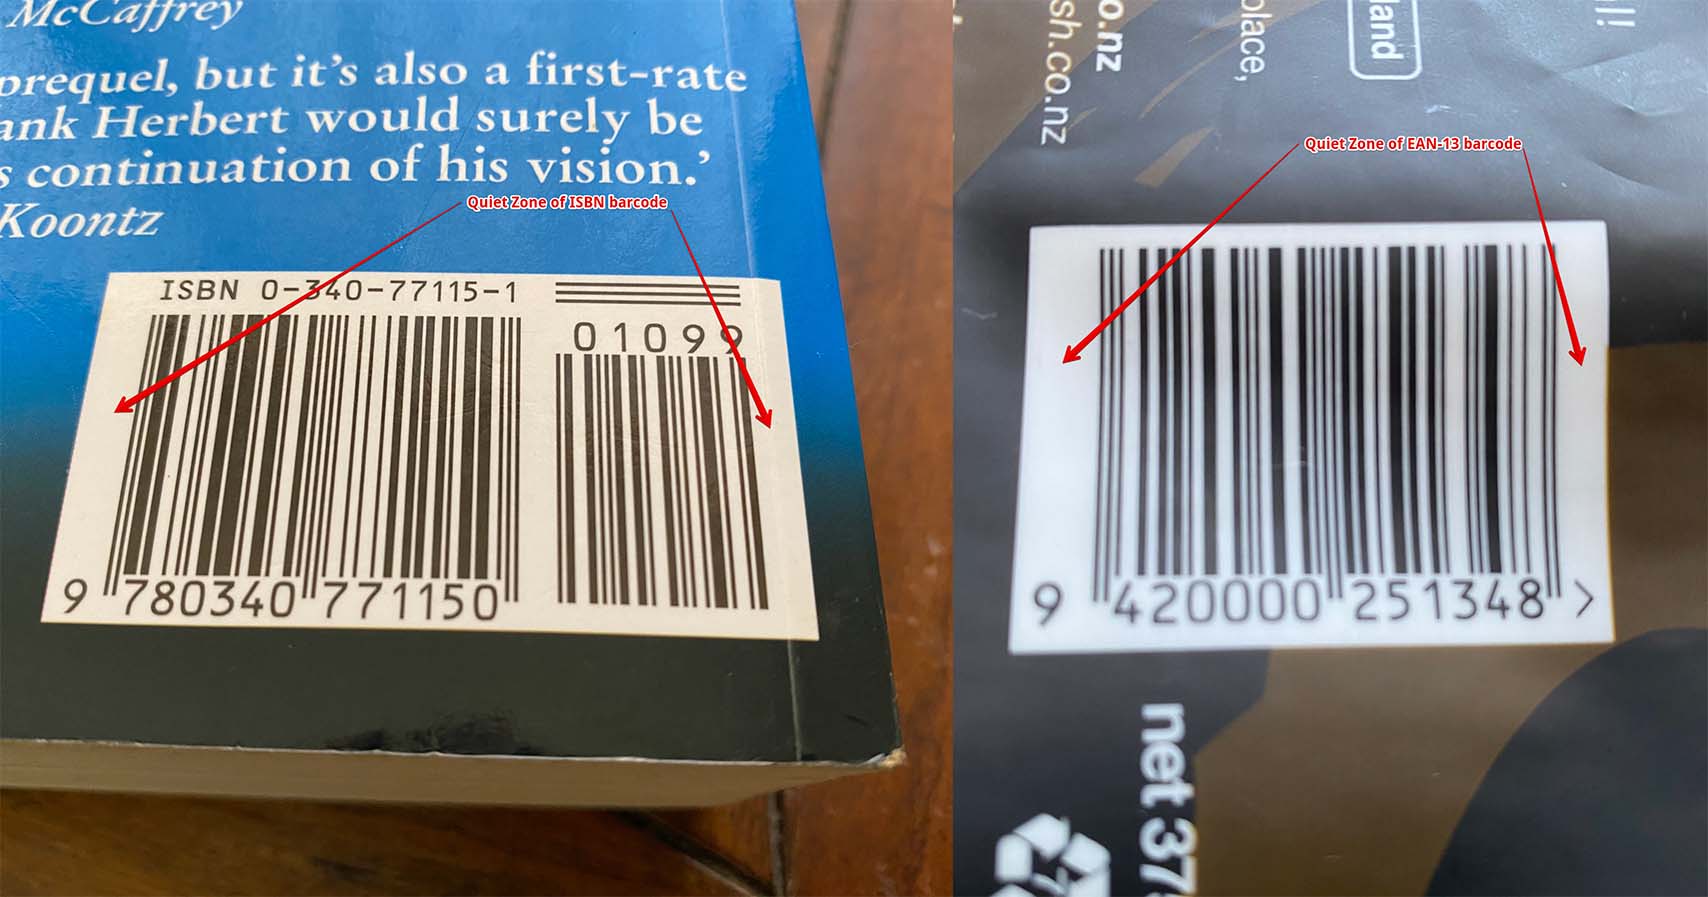 Examples of the quiet zone in barcode photos